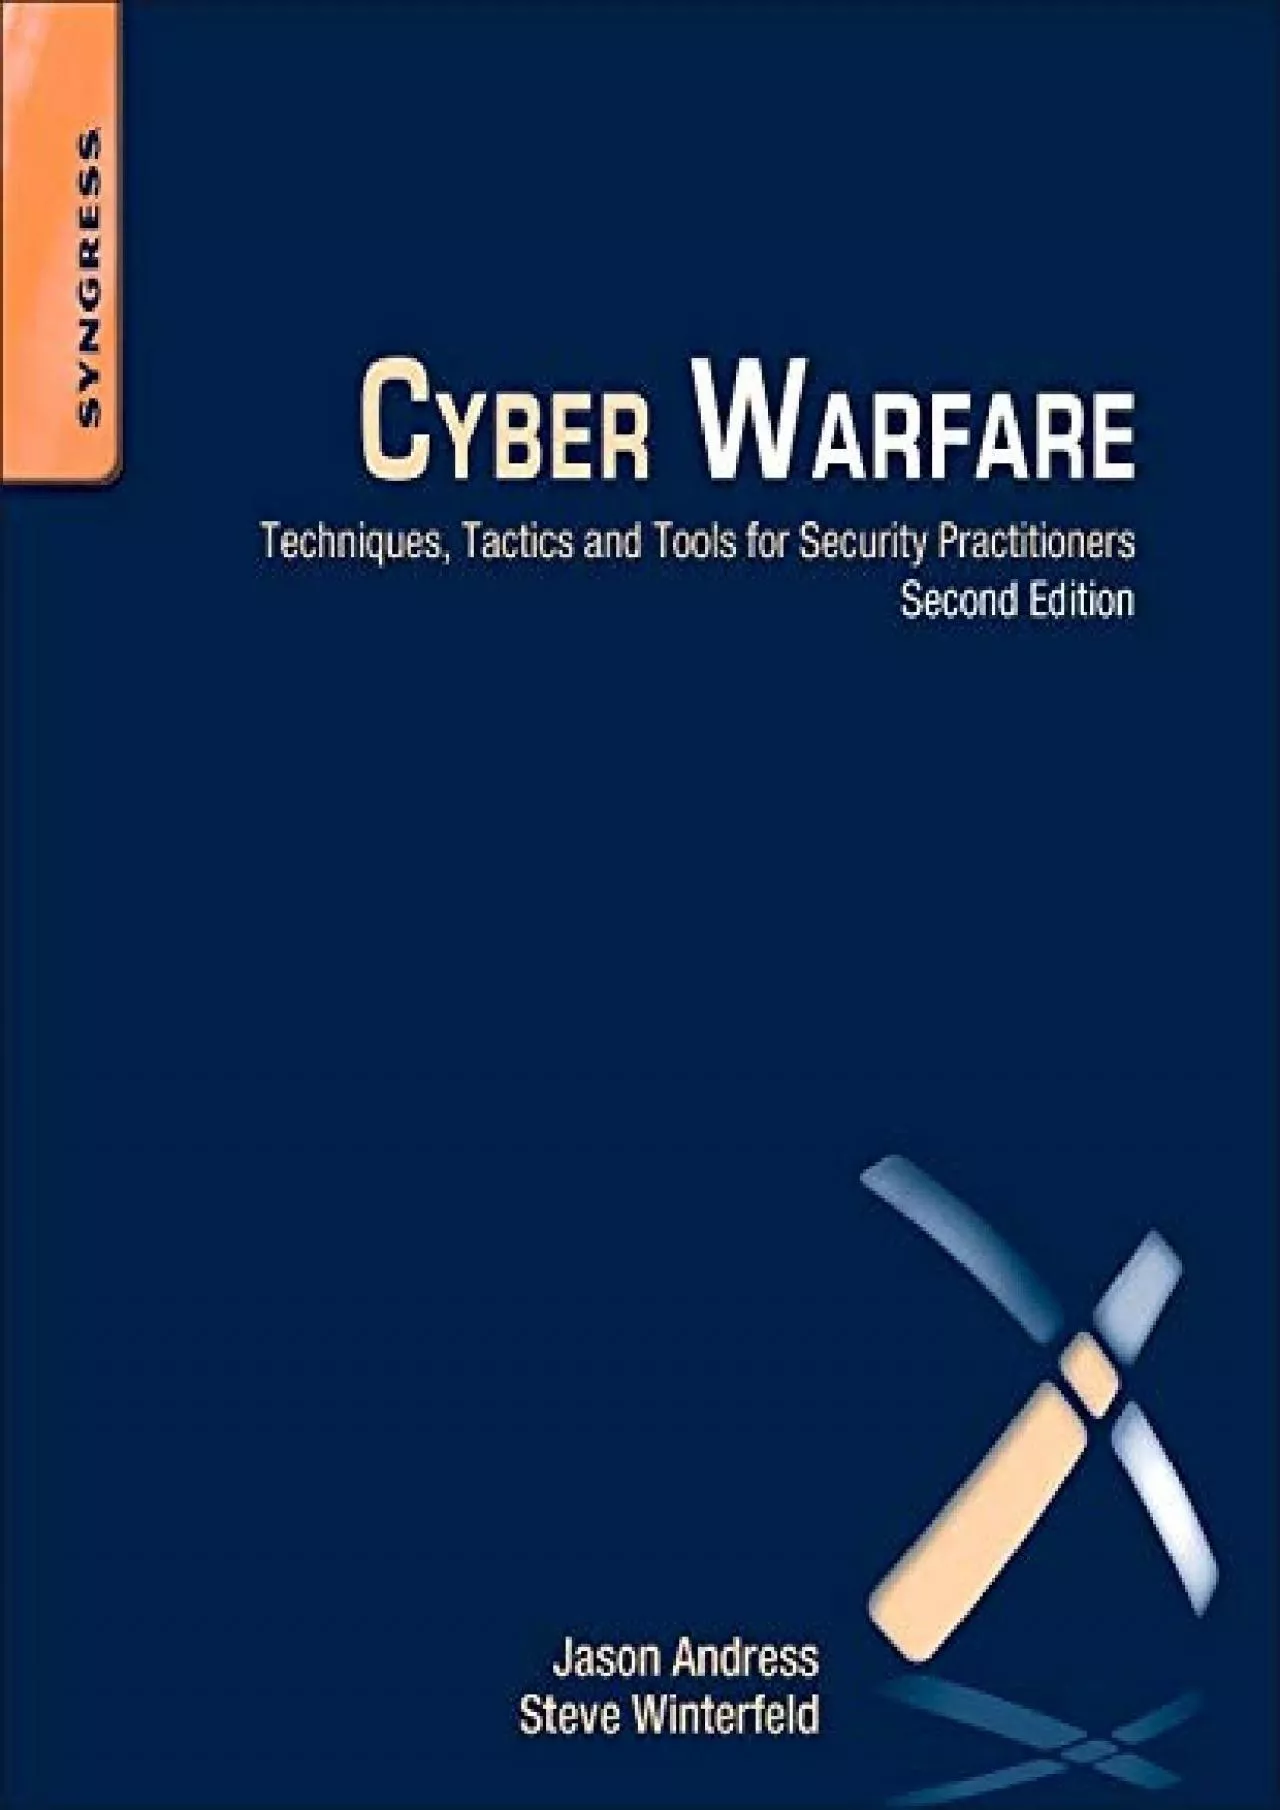 (BOOS)-Cyber Warfare: Techniques, Tactics and Tools for Security Practitioners